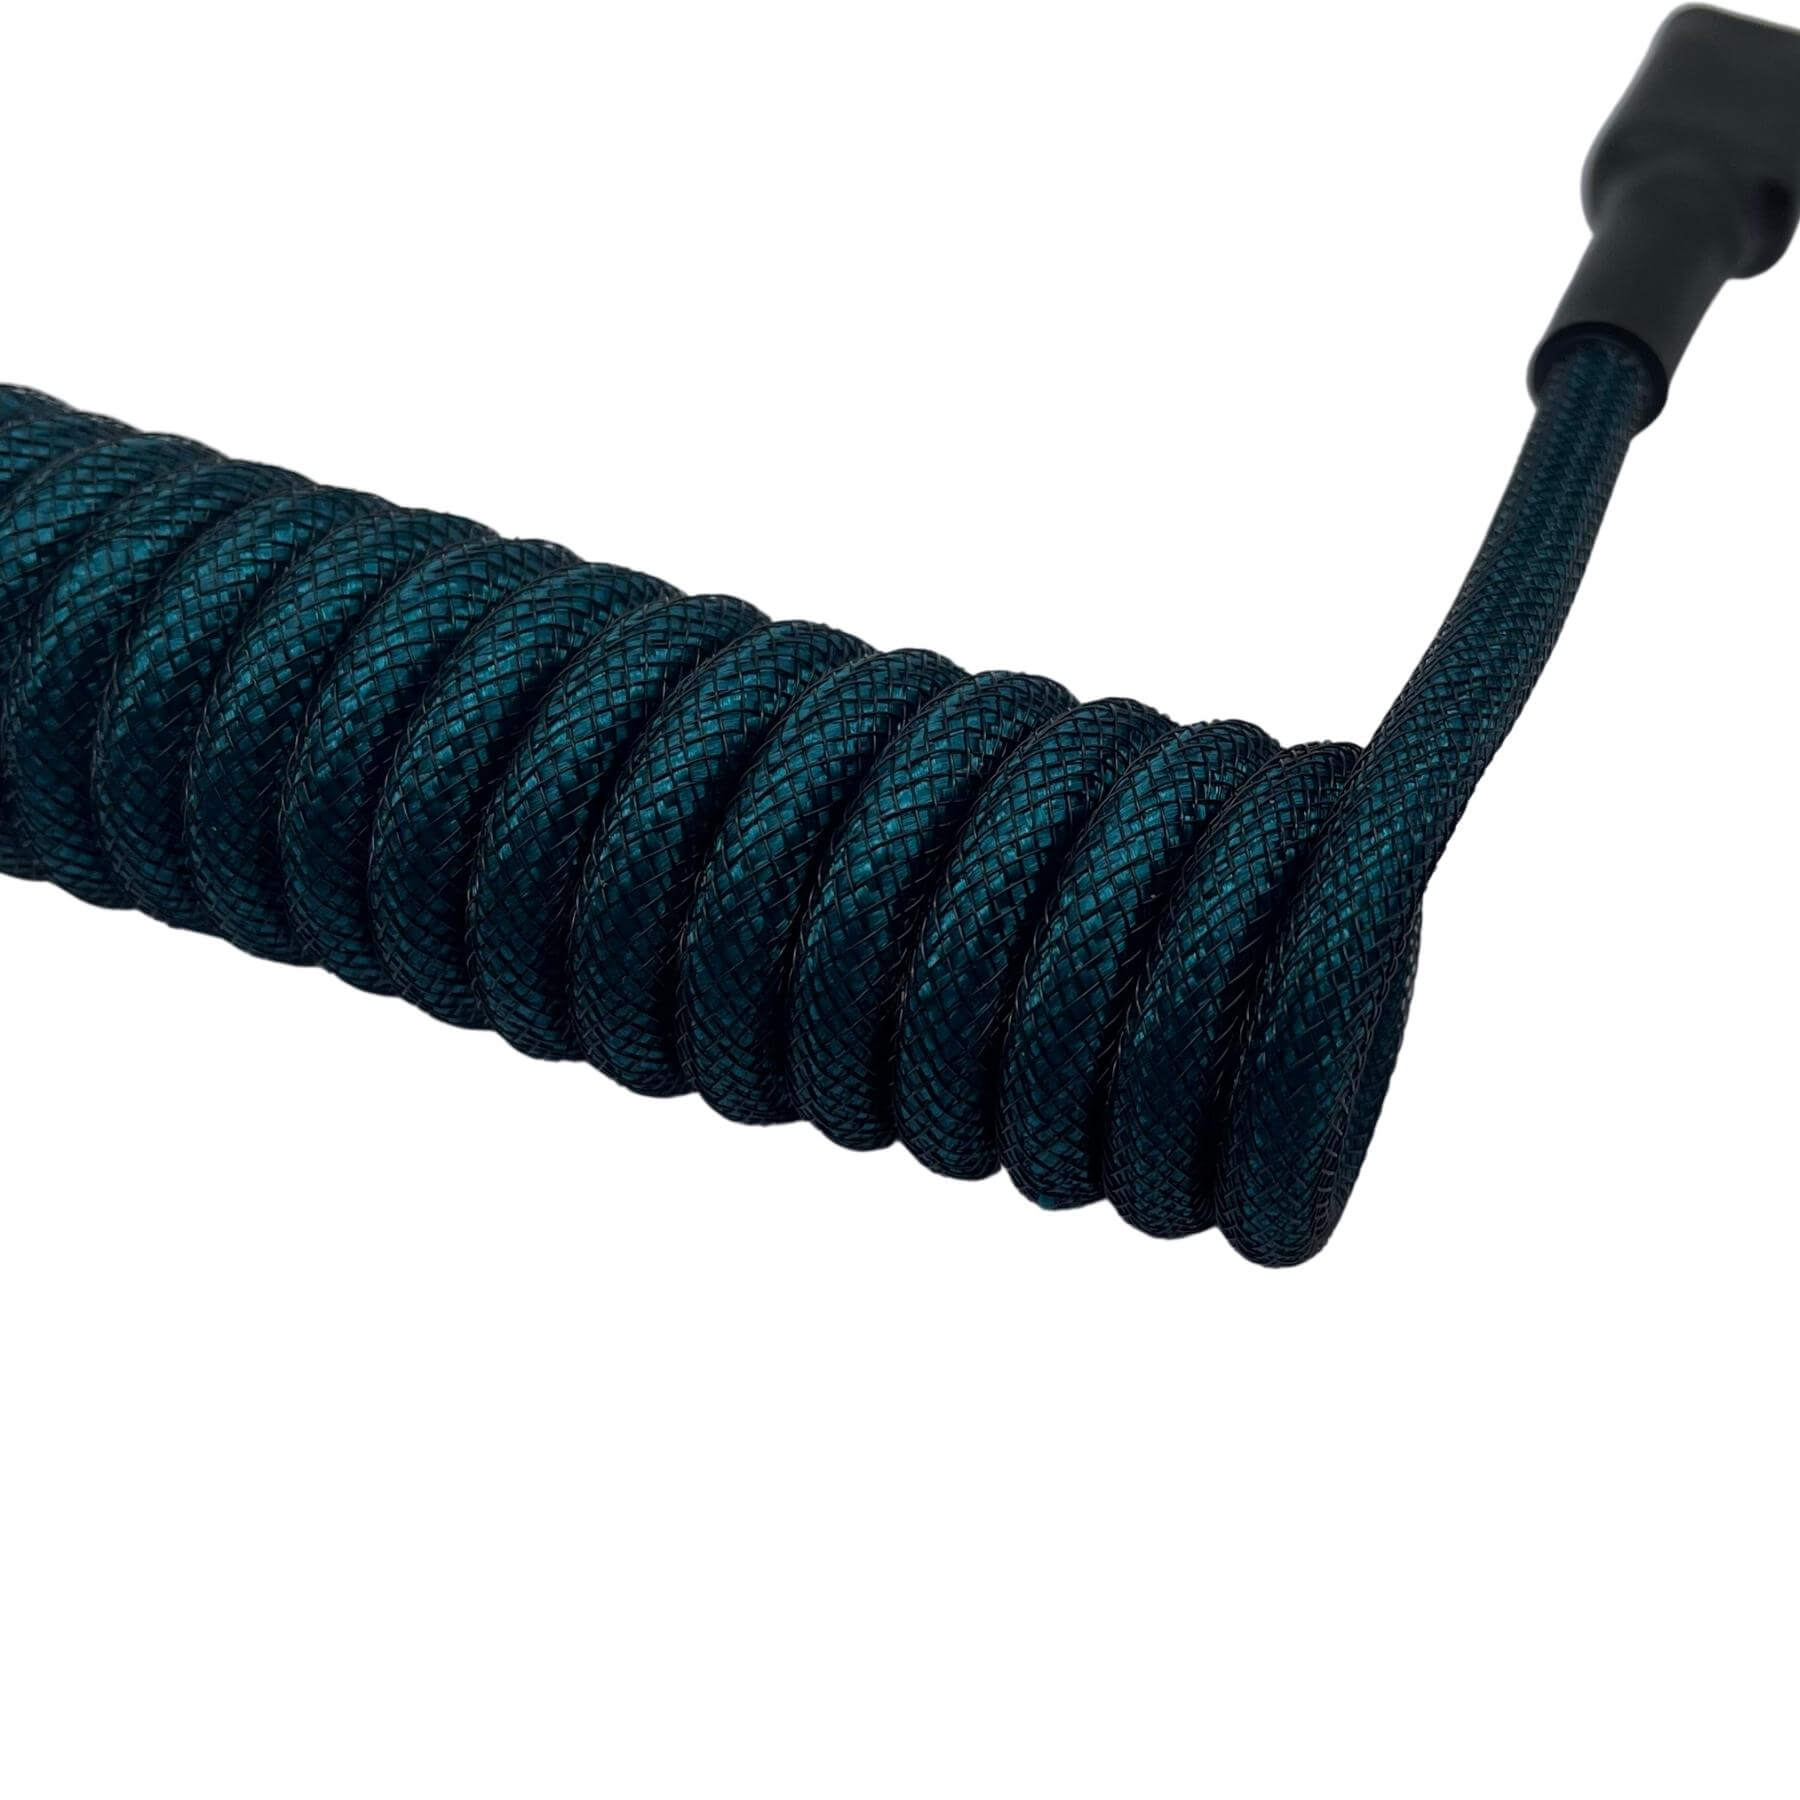 Teal Coiled Cable